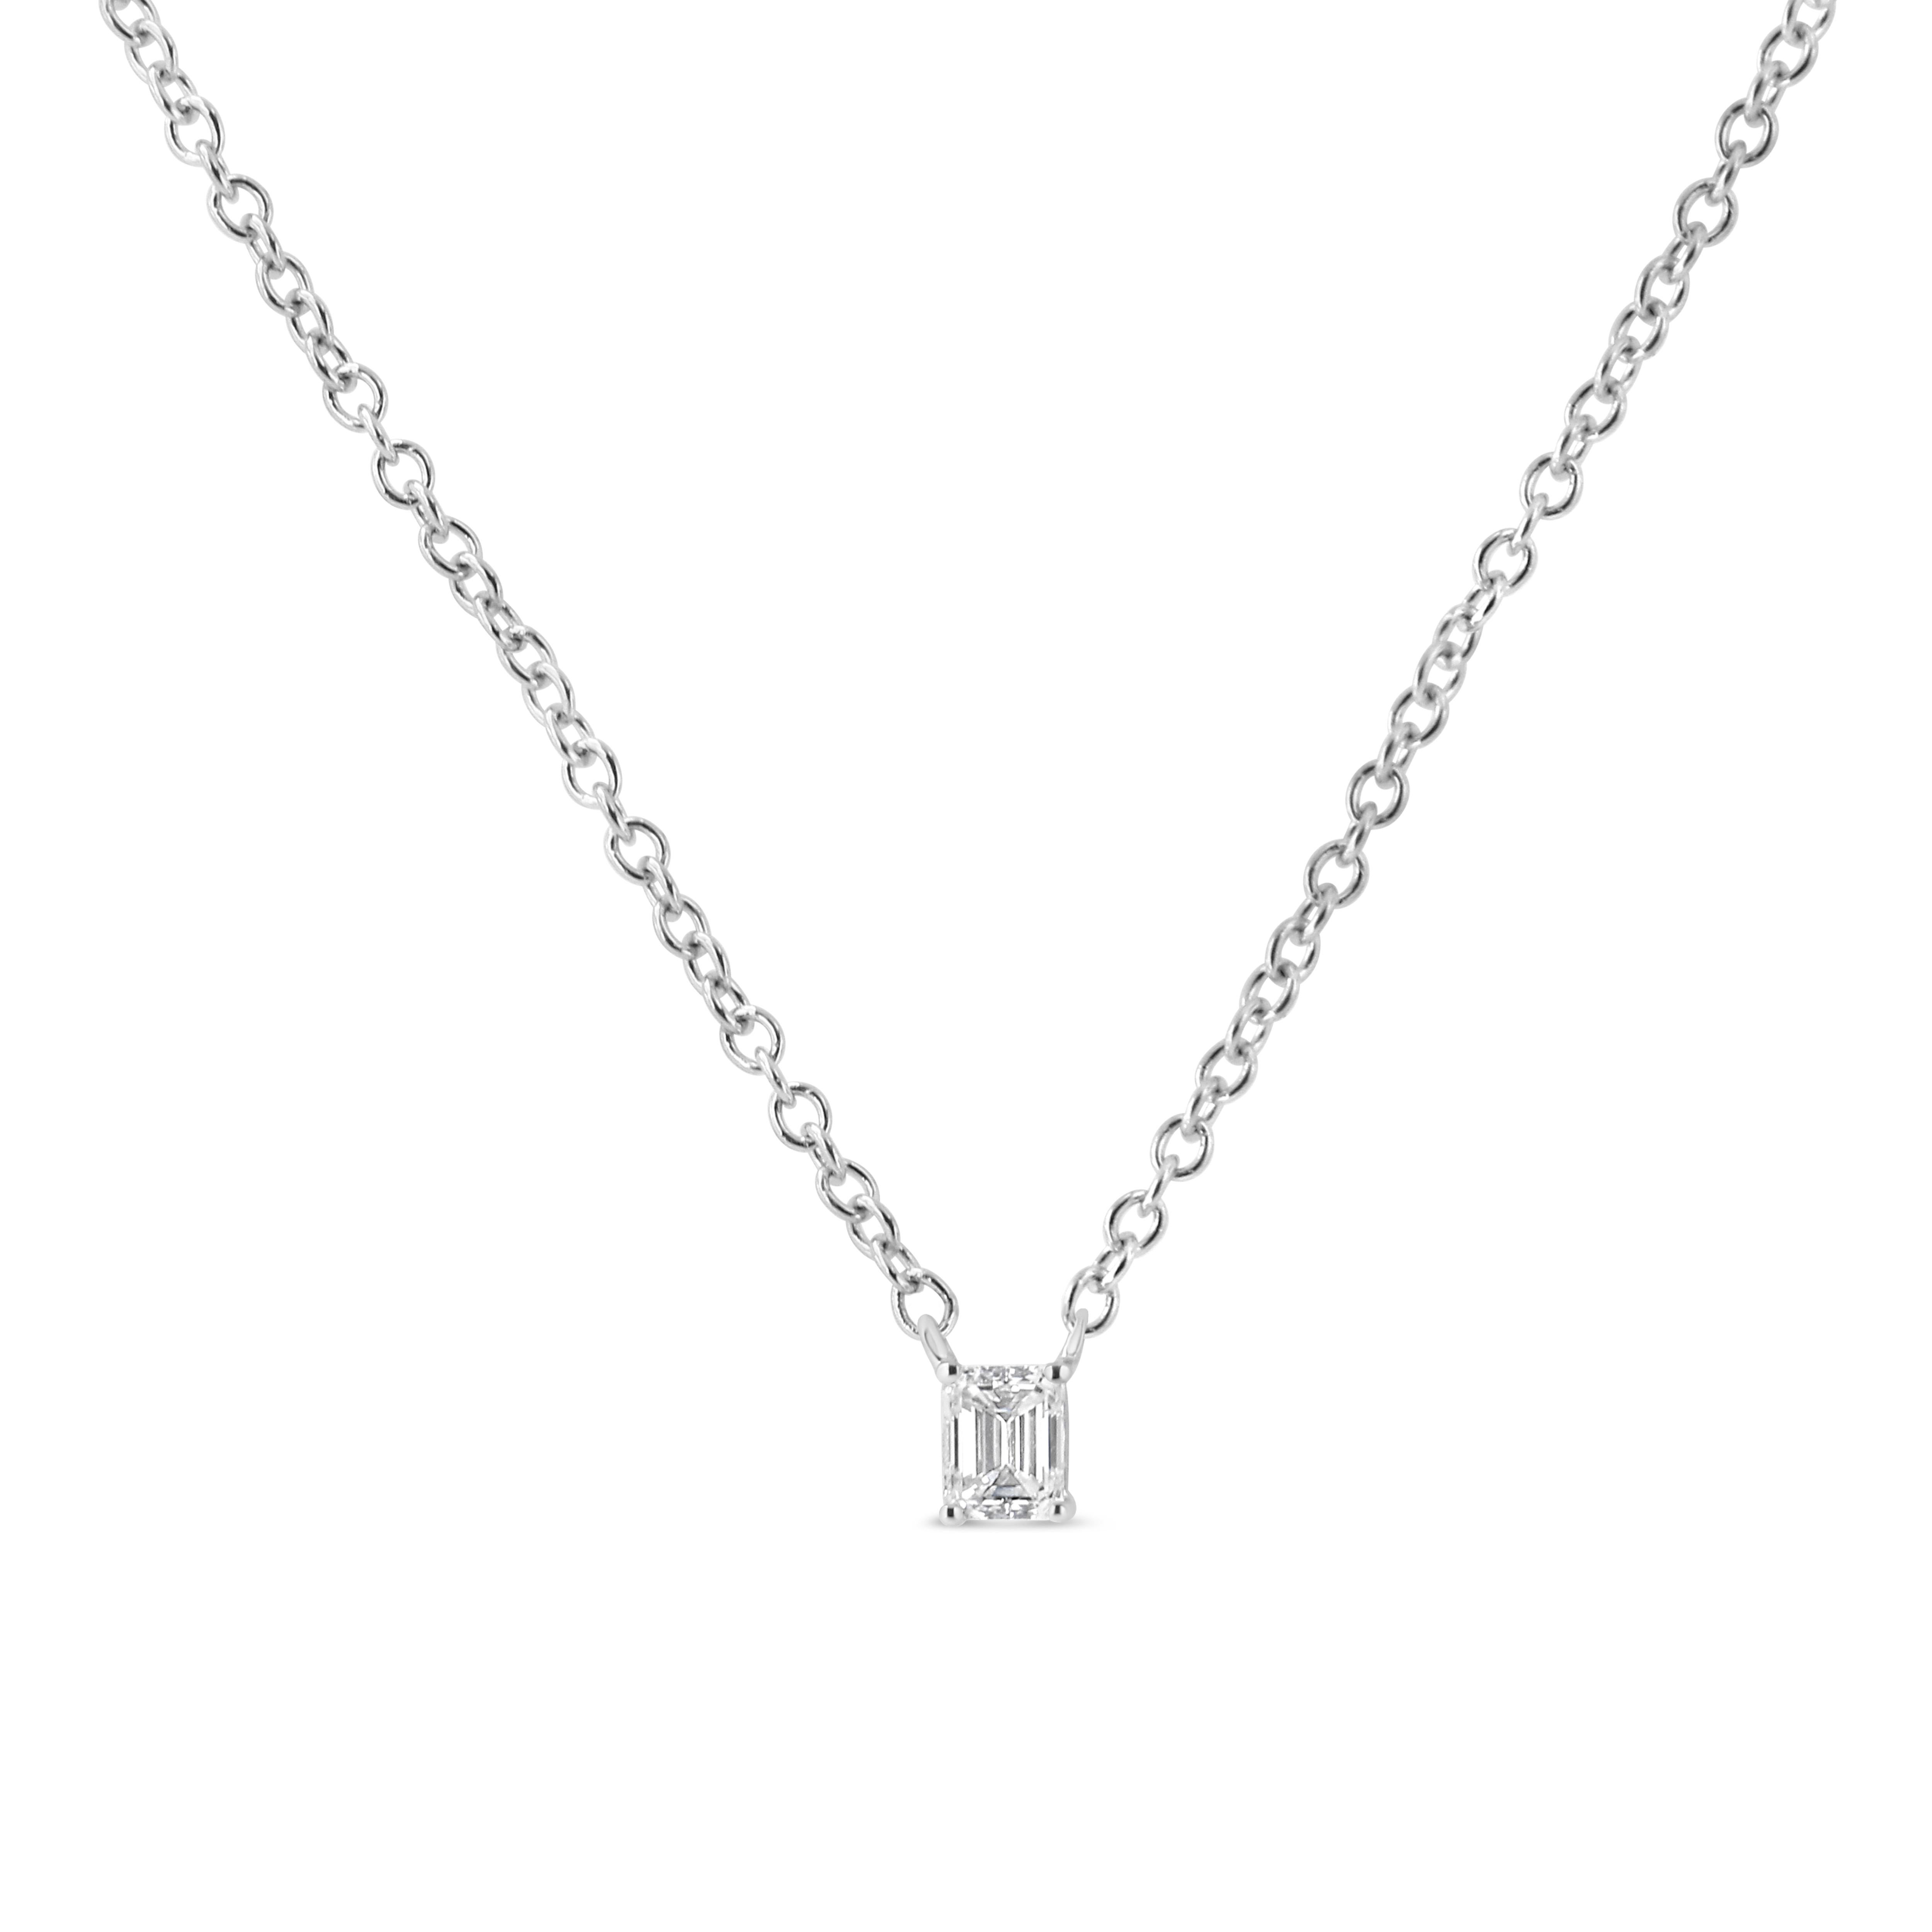 Elevate your everyday look with this unique 1/5 cttw solitaire diamond pendant. This beautiful necklace is crafted in 14k white gold, a metal that will stay tarnish free for years to come. The diamond has a unique emerald shape and is embellished in